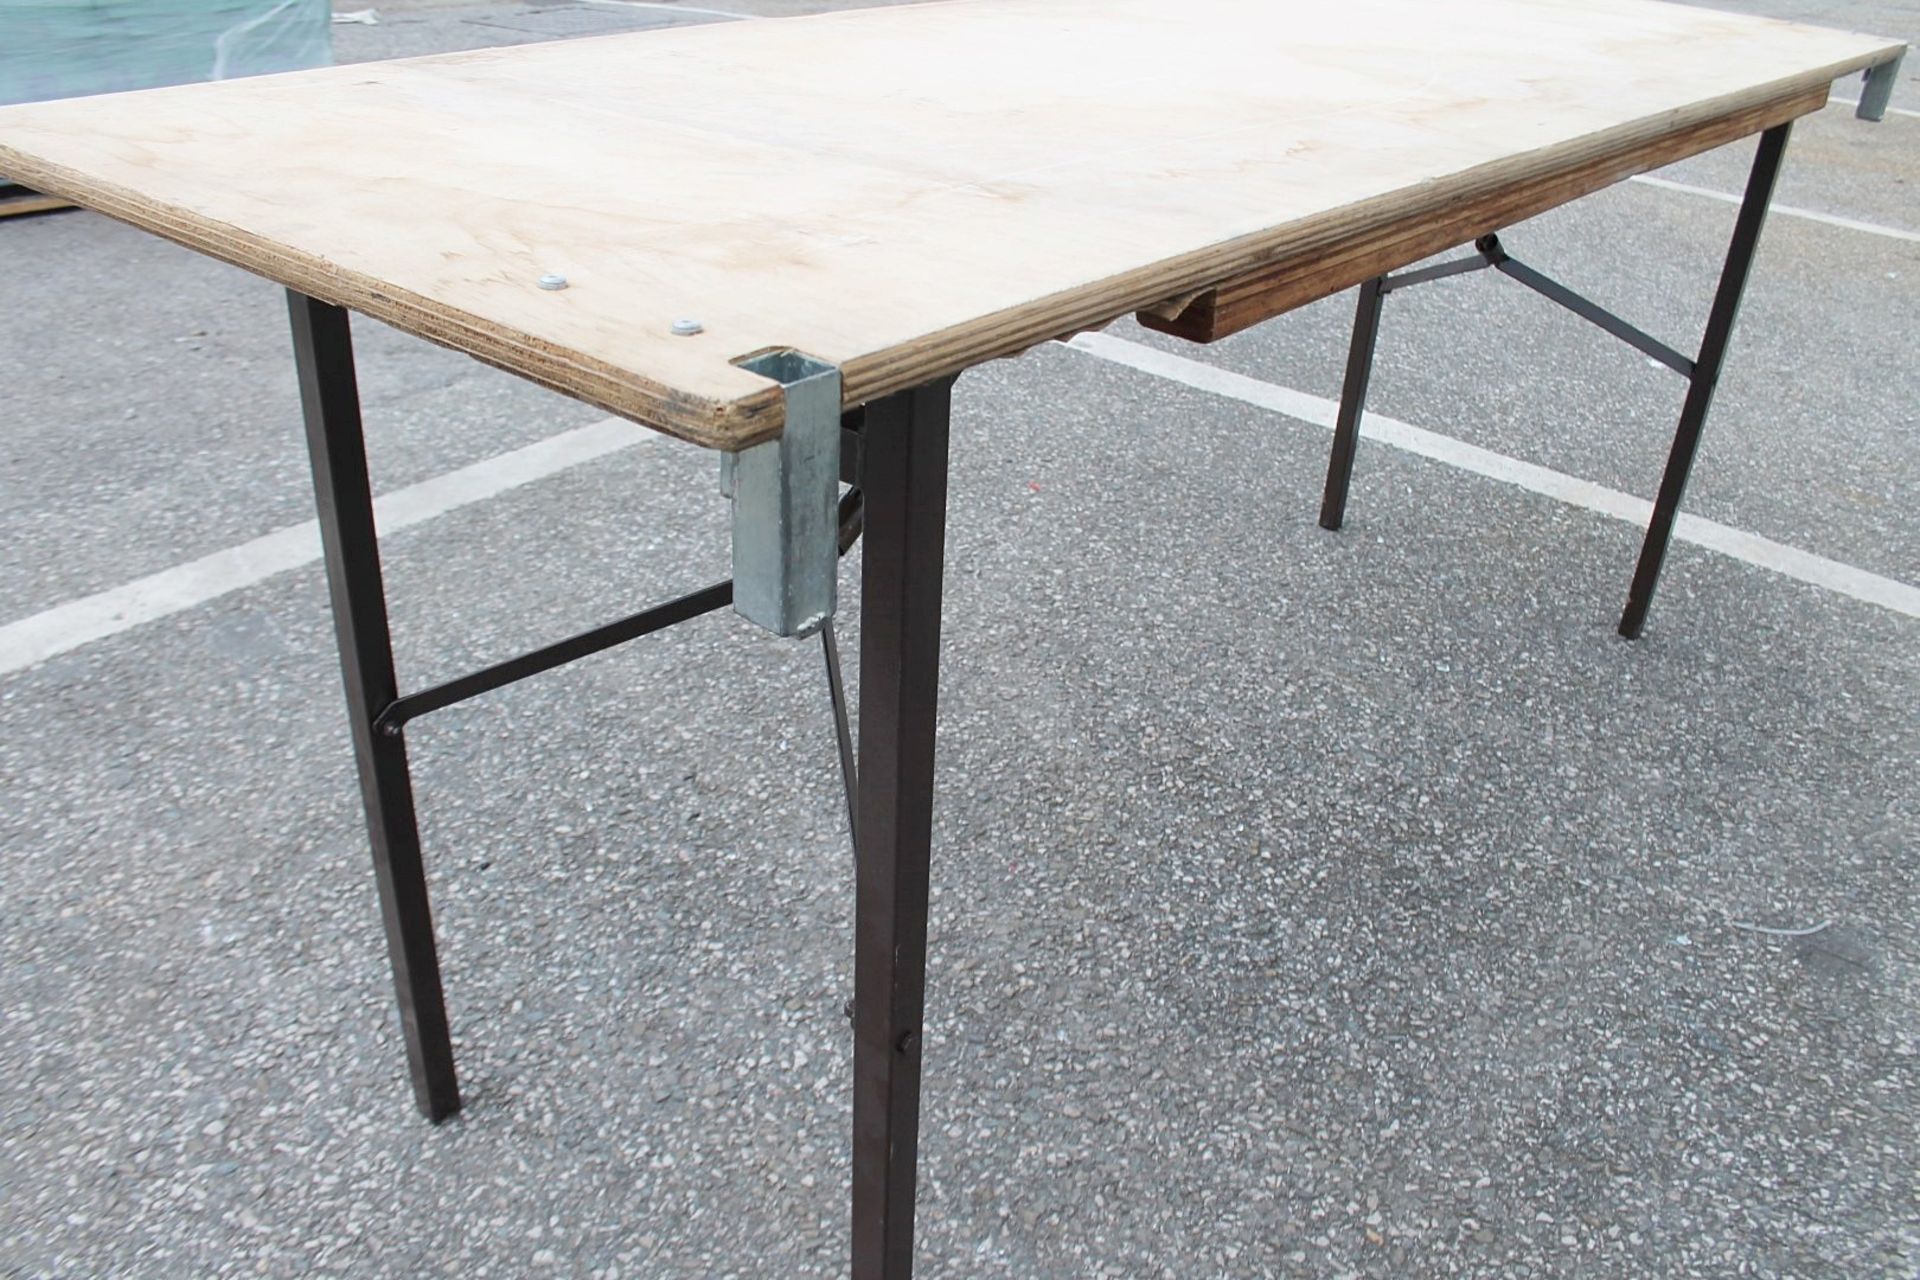 4 x Folding 6ft Wooden Topped Rectangular Trestle Tables - Recently Removed From A Well-known London - Image 3 of 6